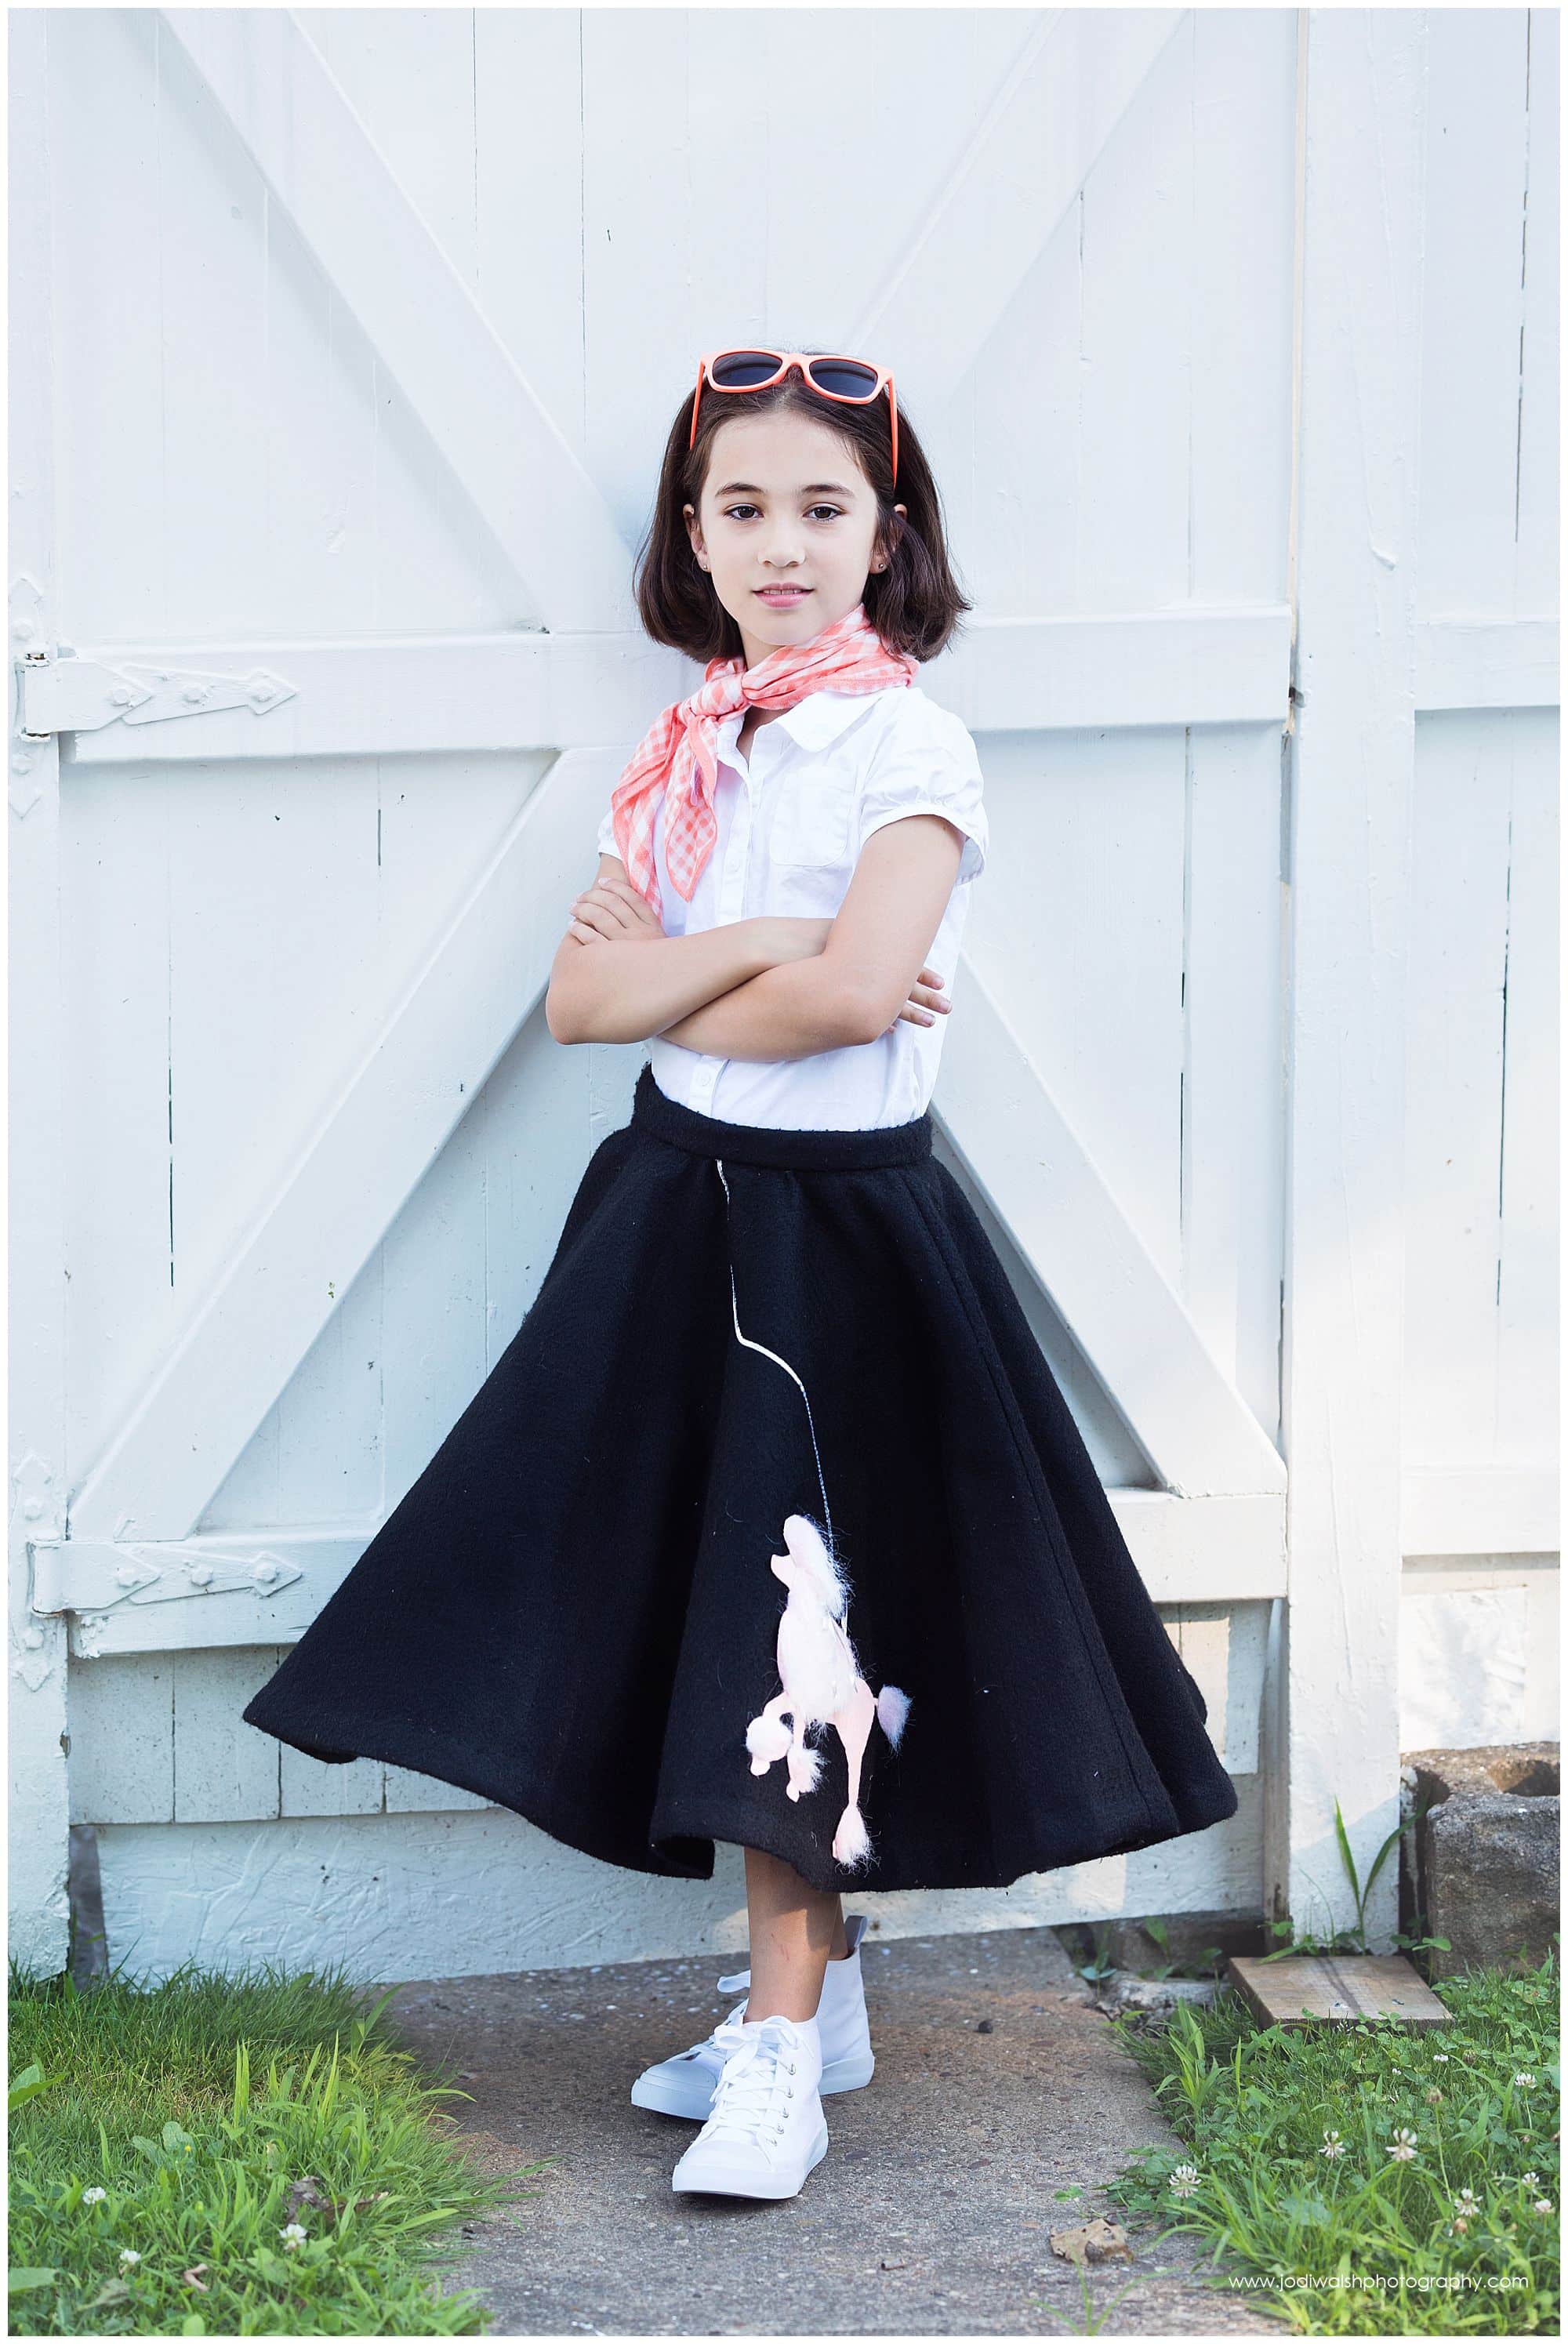 50s girl in poodle skirt